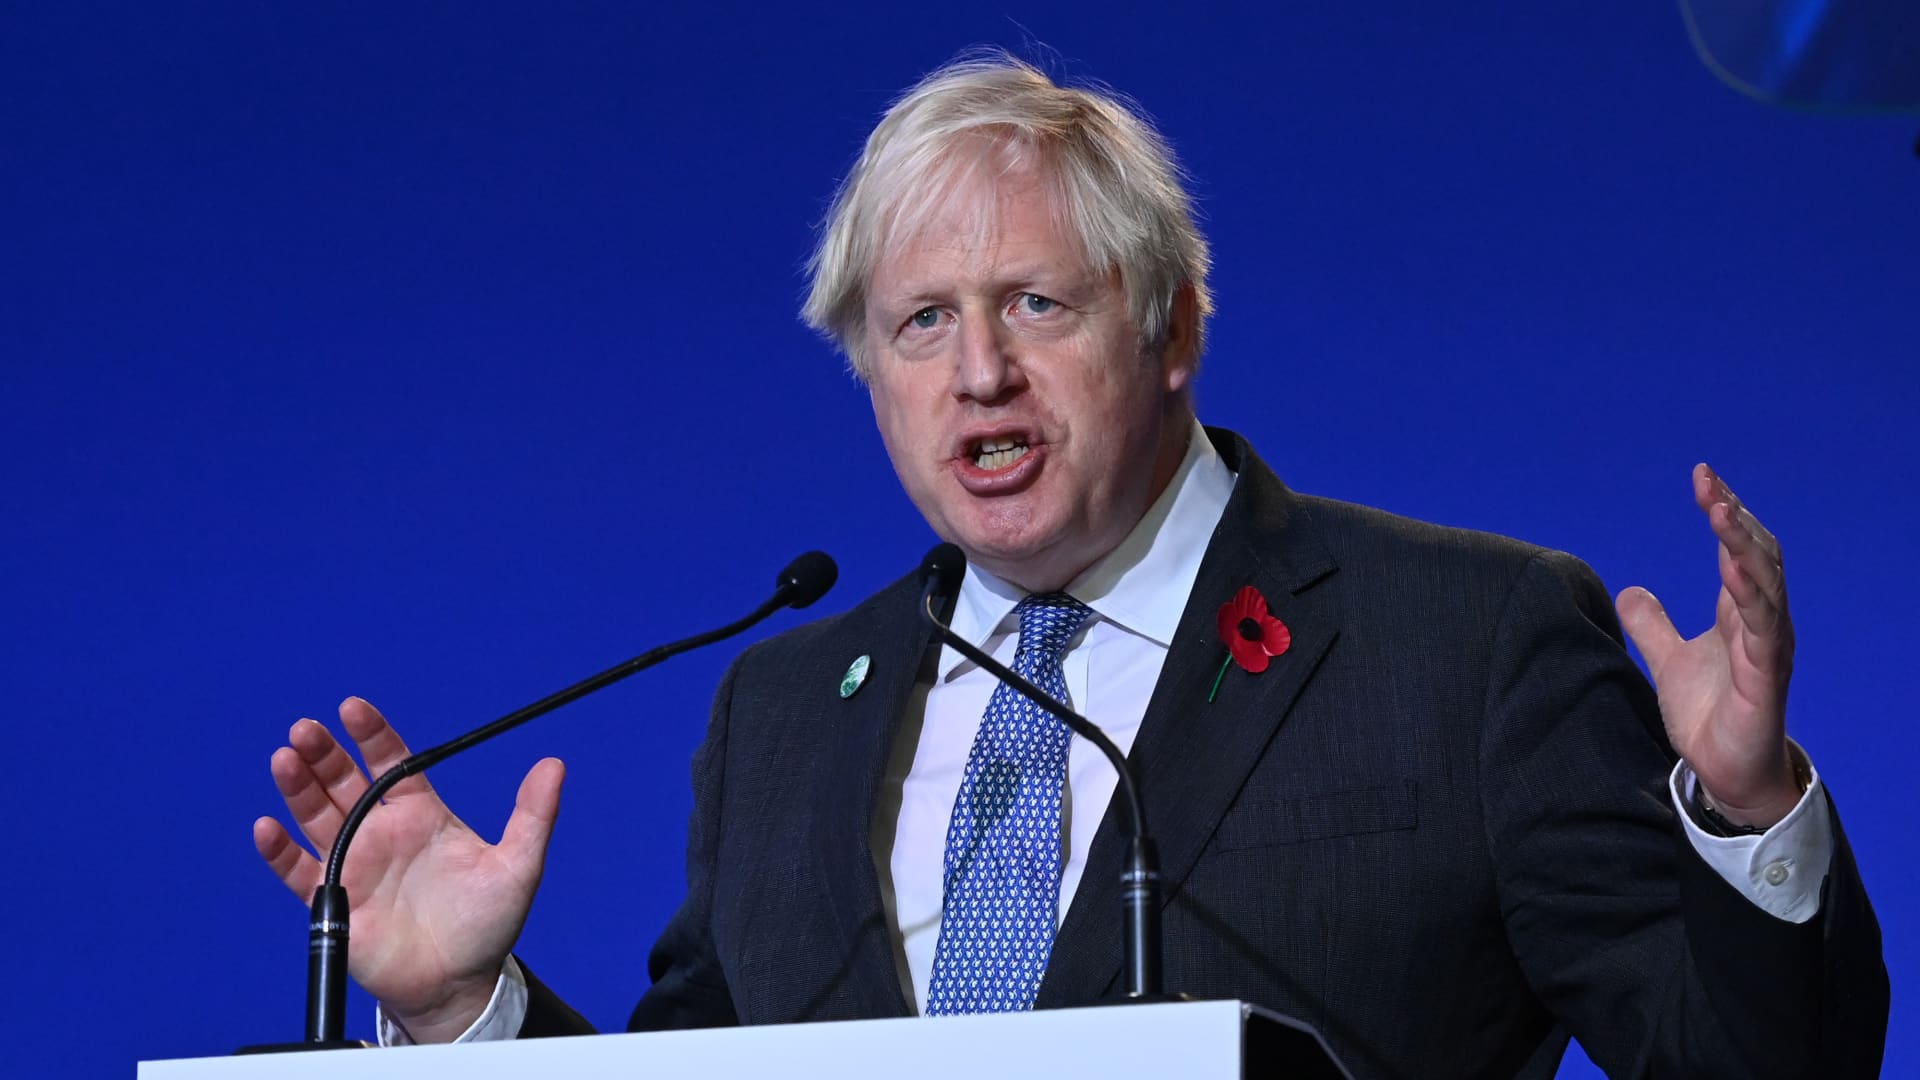 British Prime Minister Boris Johnson speaks during the opening ceremony of the UN Climate Change Conference COP26 at SECC on November 1, 2021 in Glasgow, United Kingdom. World Leaders attending COP26 are under pressure to agree measures to deliver on emission reduction targets that will lead the world to net-zero by 2050.